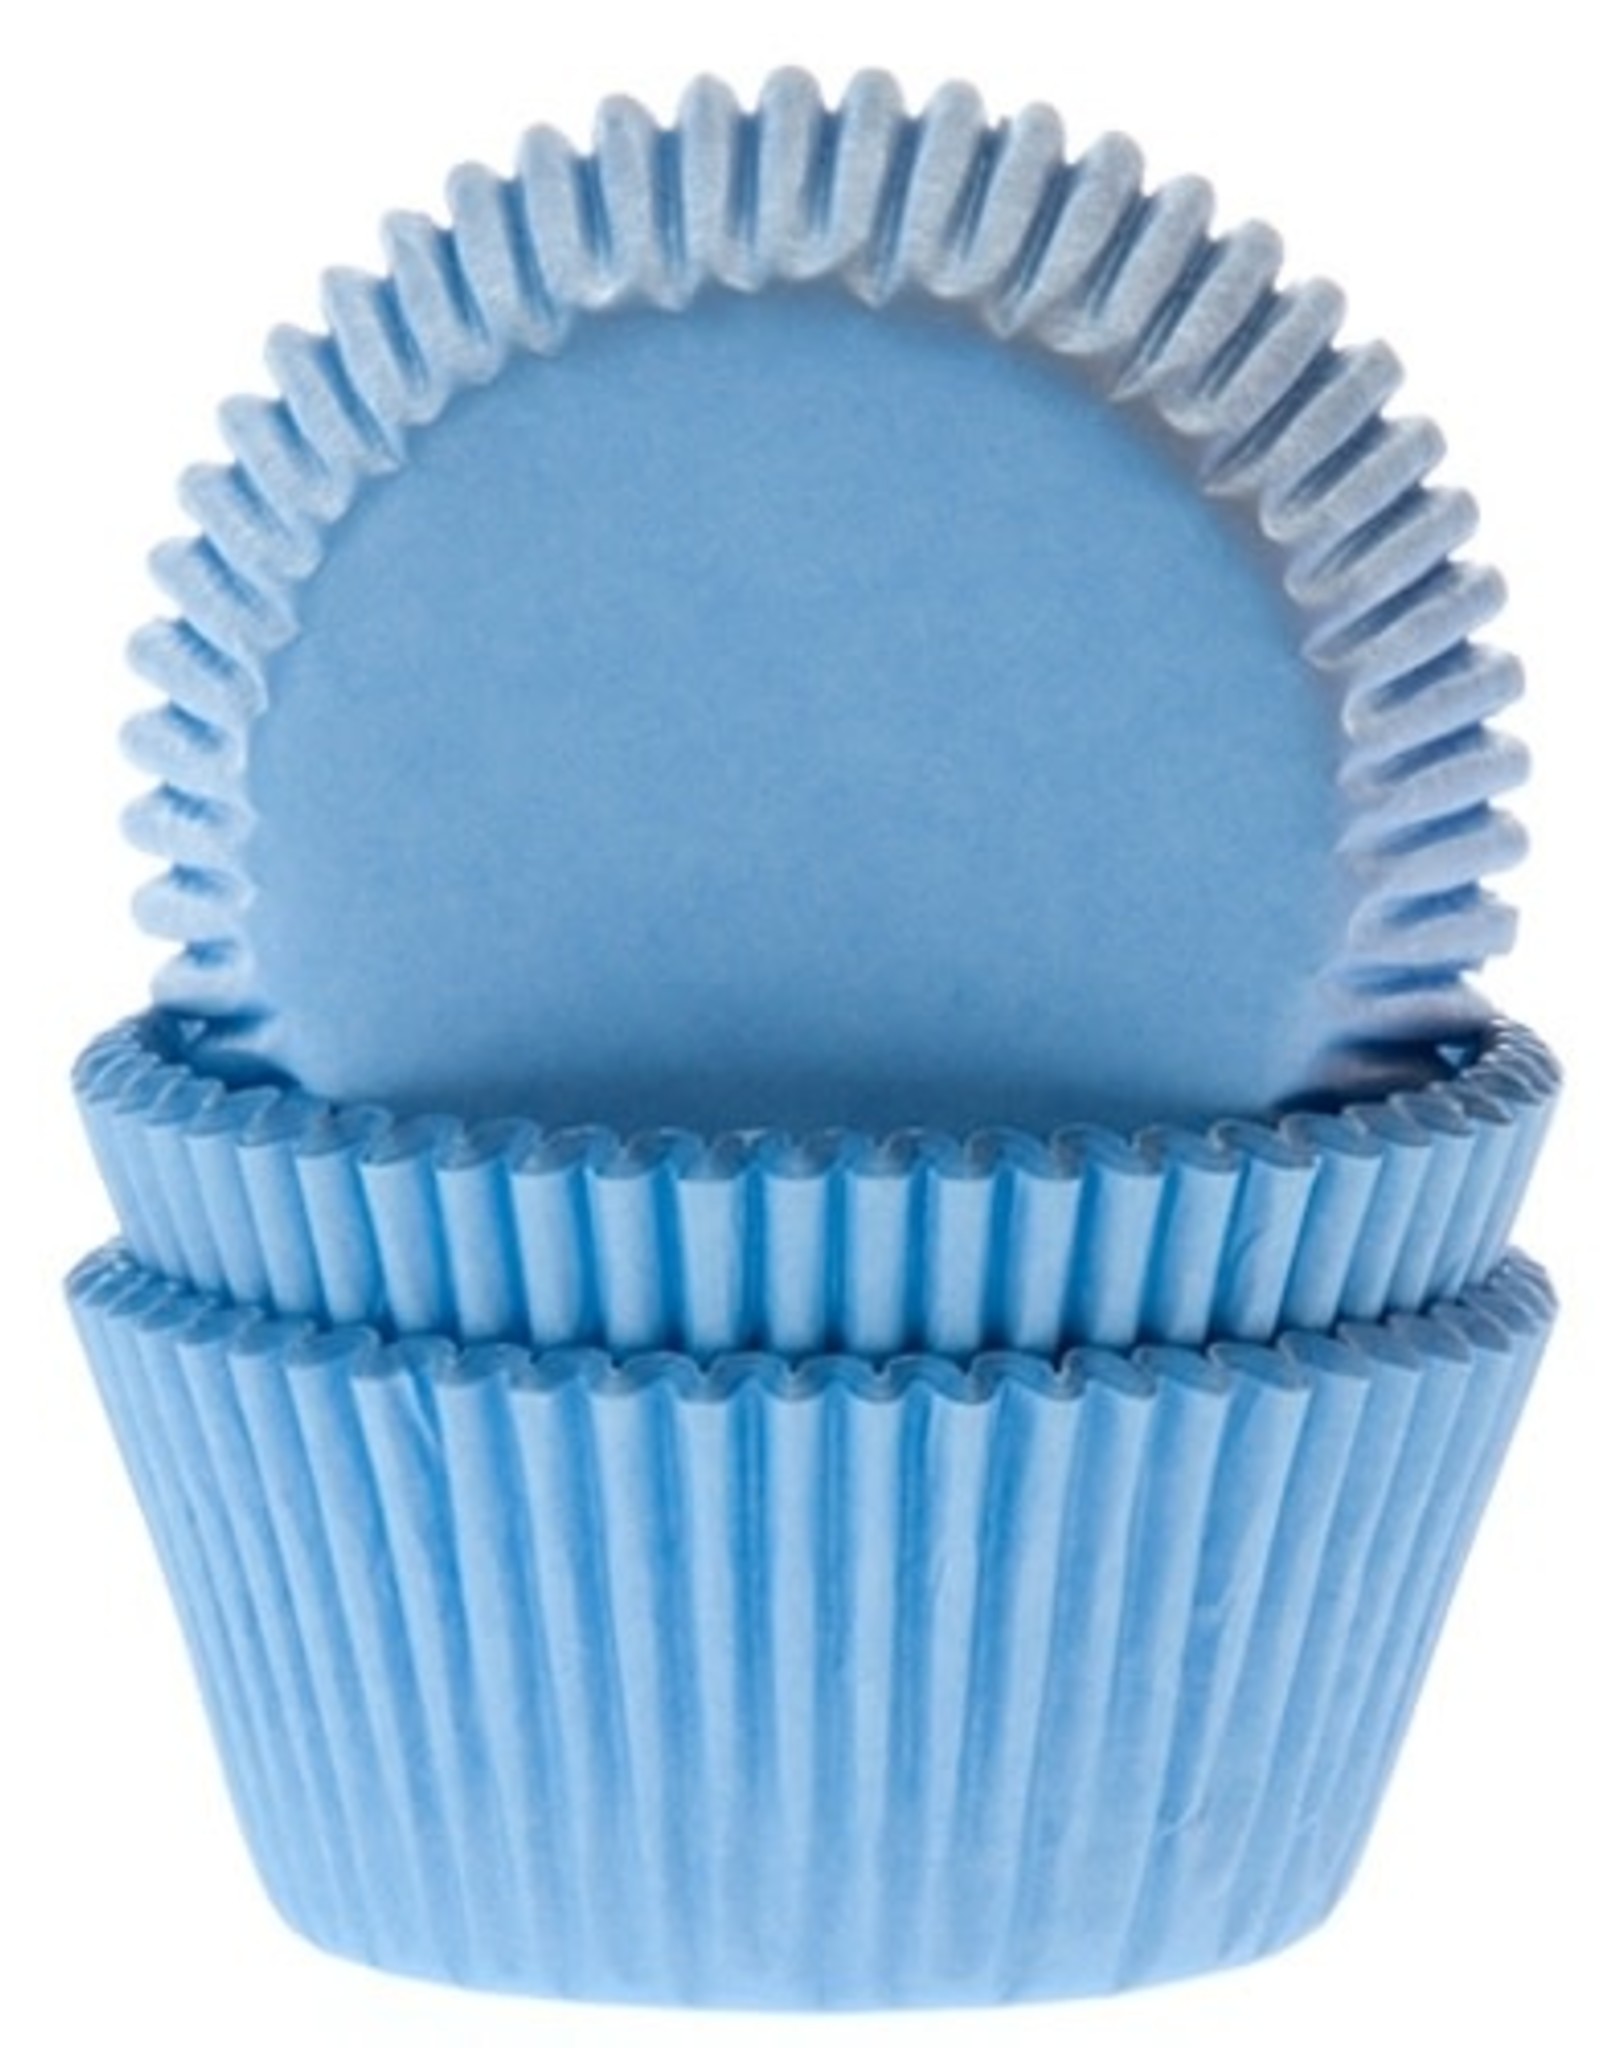 House of Marie House of Marie Baking Cups Licht Blauw pk/50